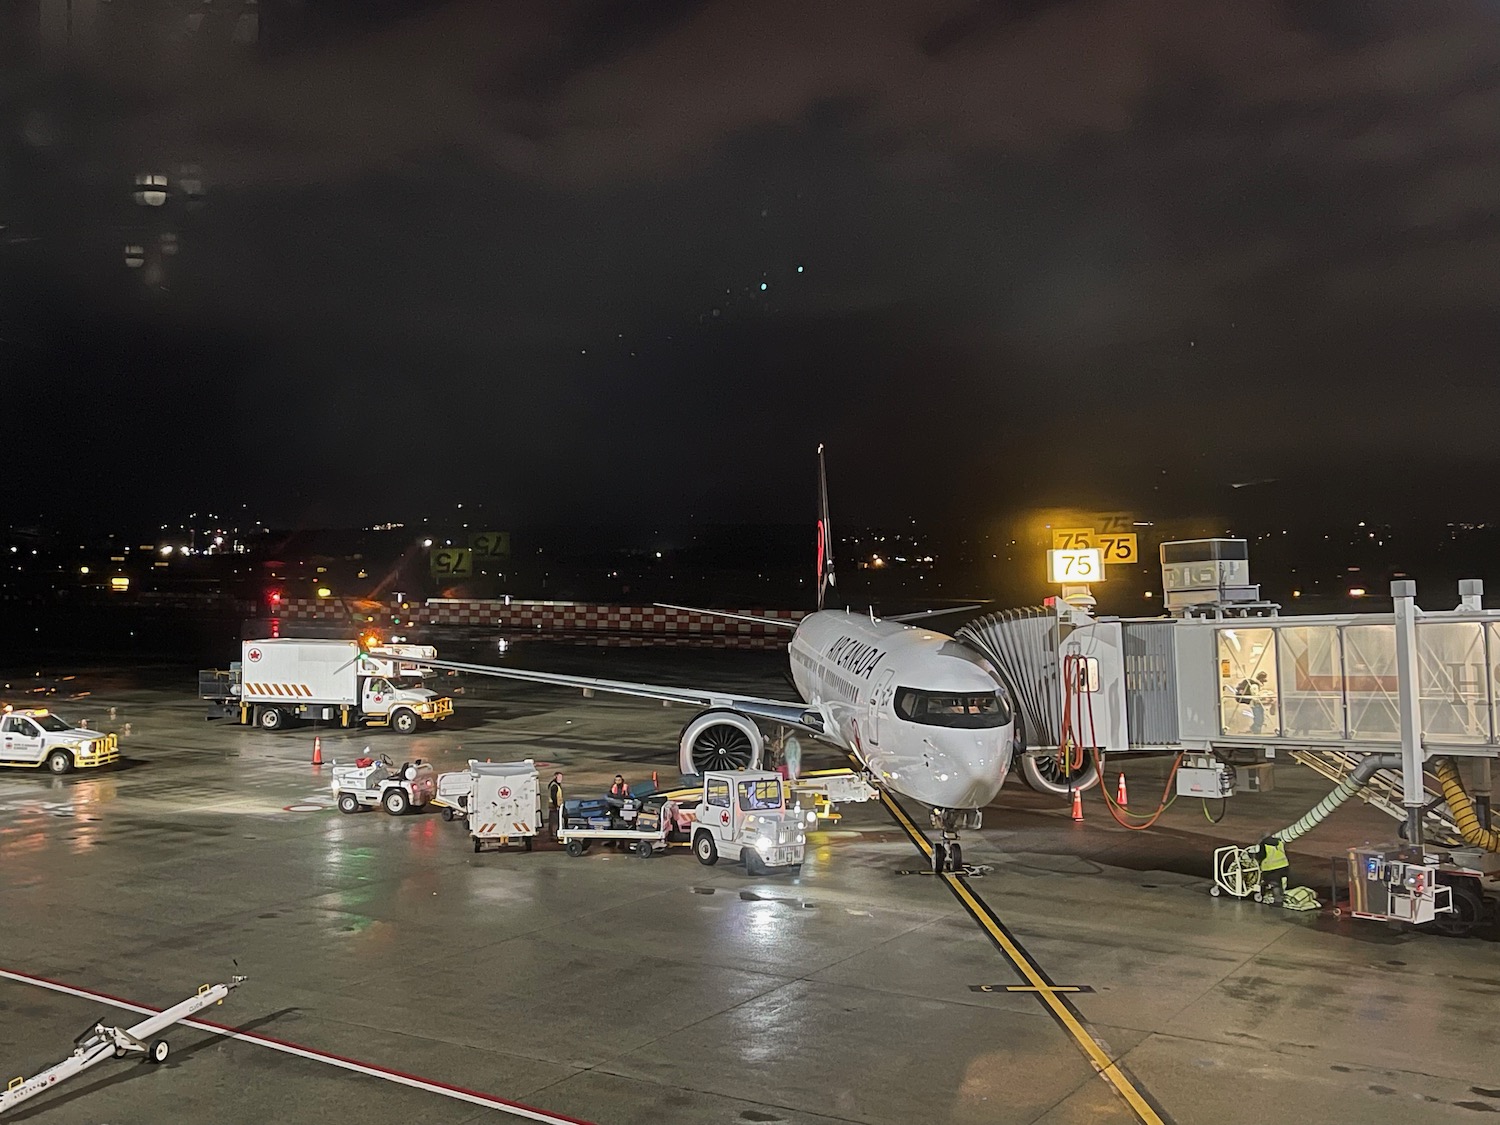 an airplane on the tarmac at night